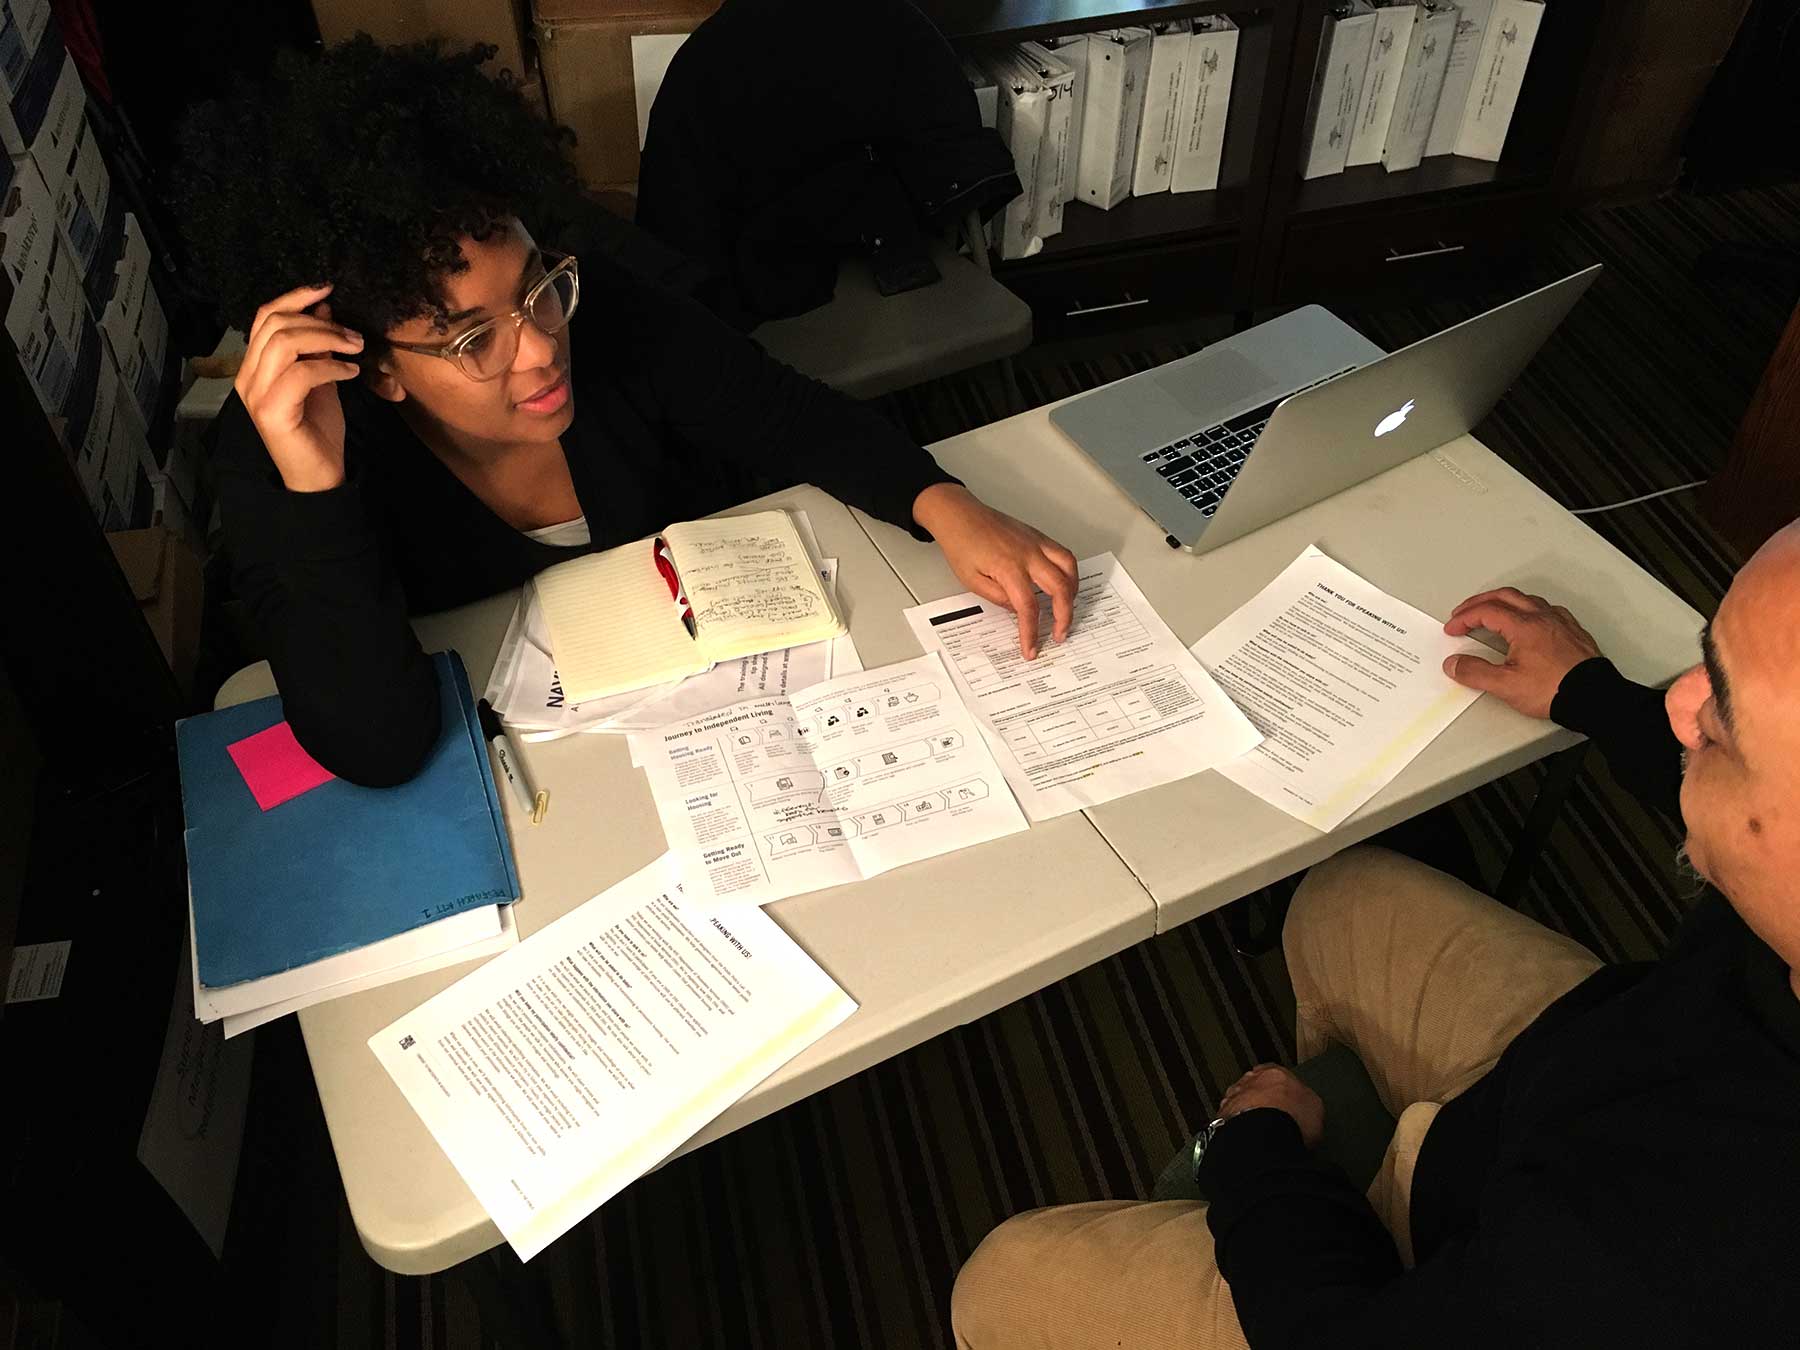 Two people review several documents at a table together.